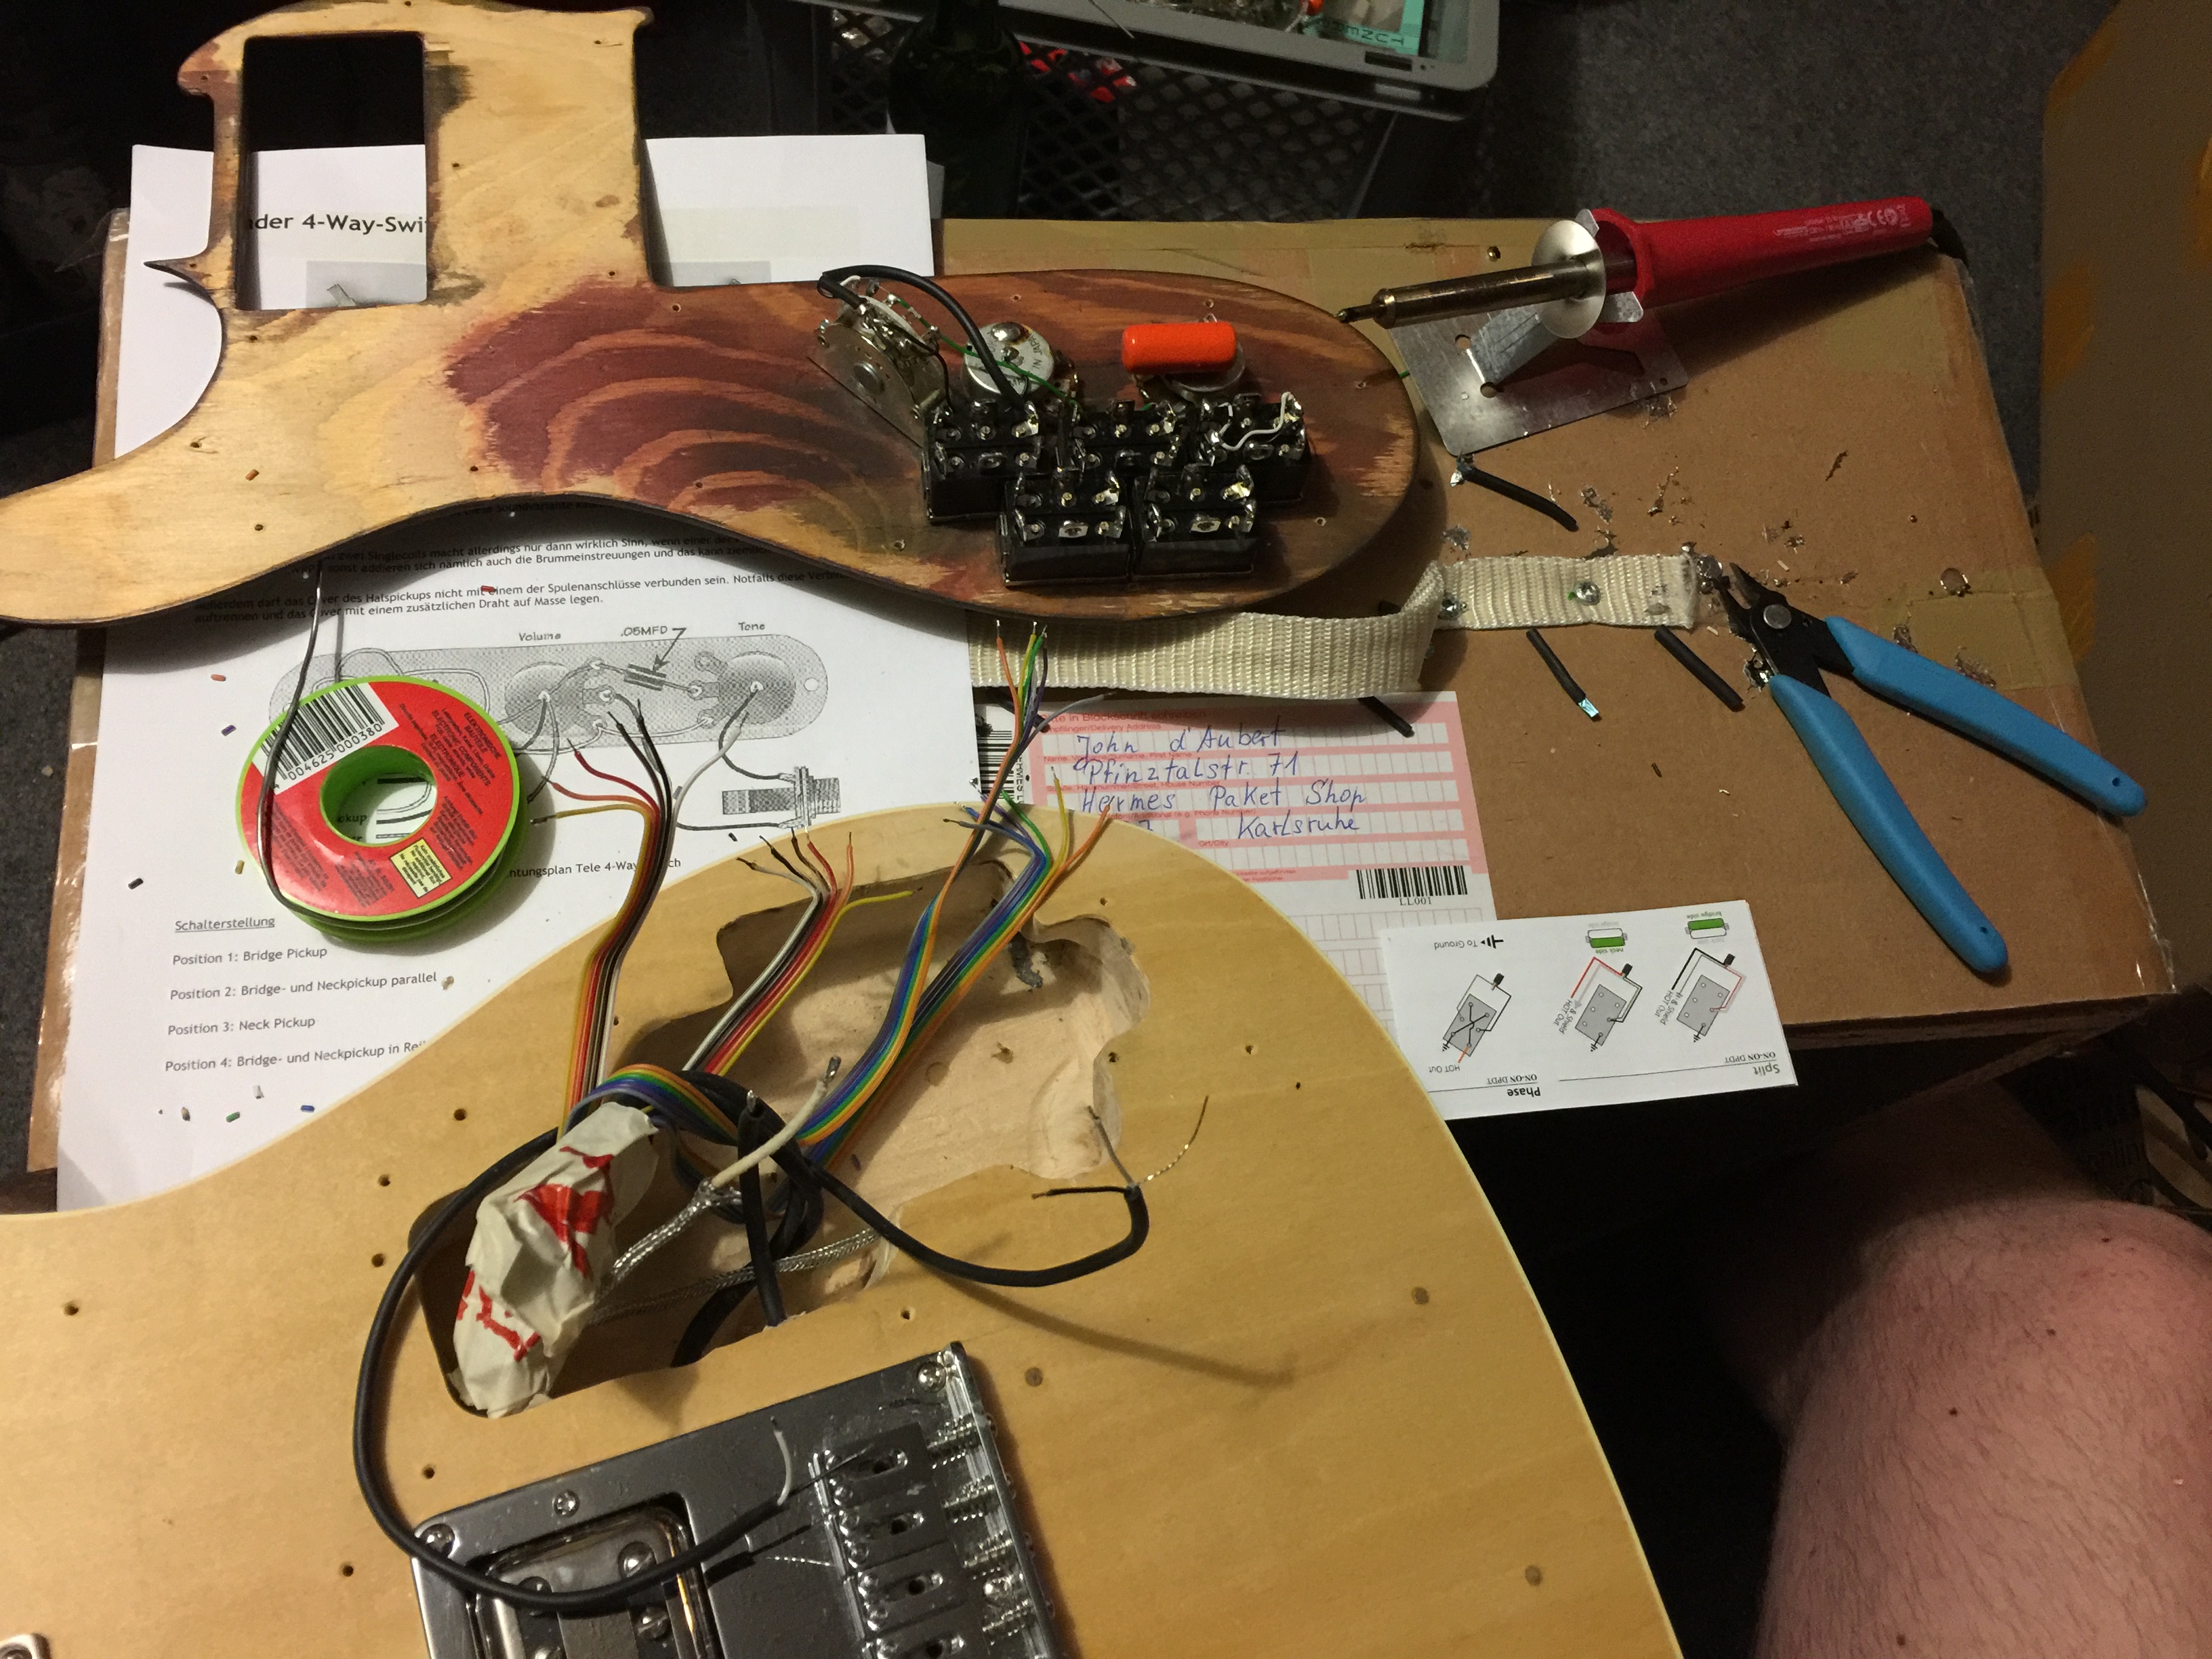 Wiring the Fender-4-Way-Switch with 2 humbuckers, 5 toggle-switches 